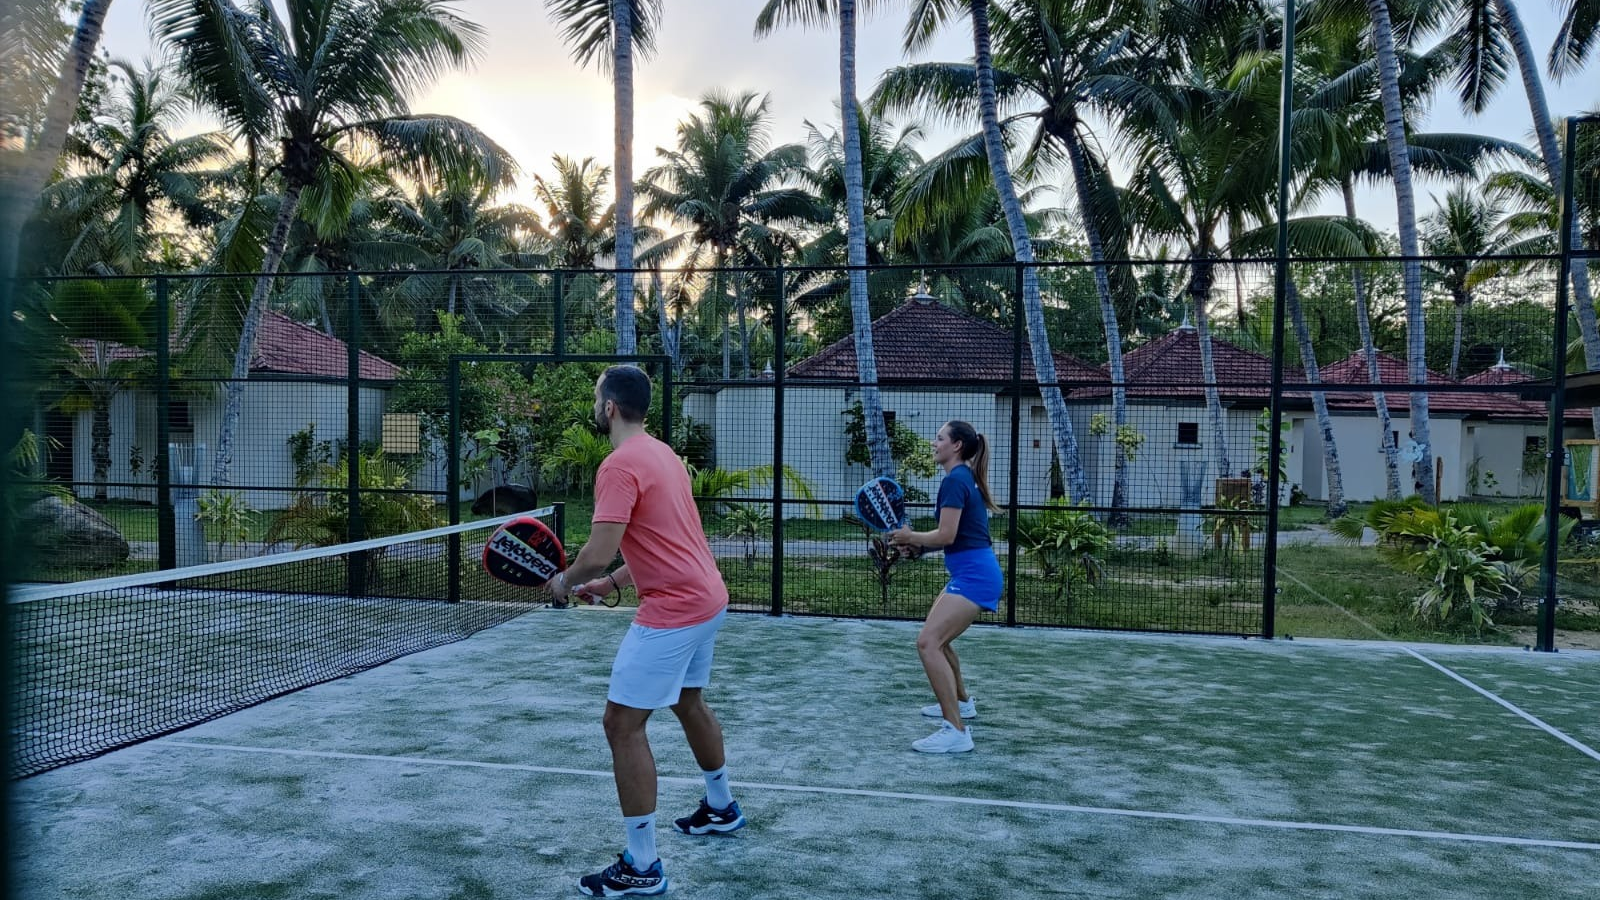 The partnership Babolat / Club Med is growing